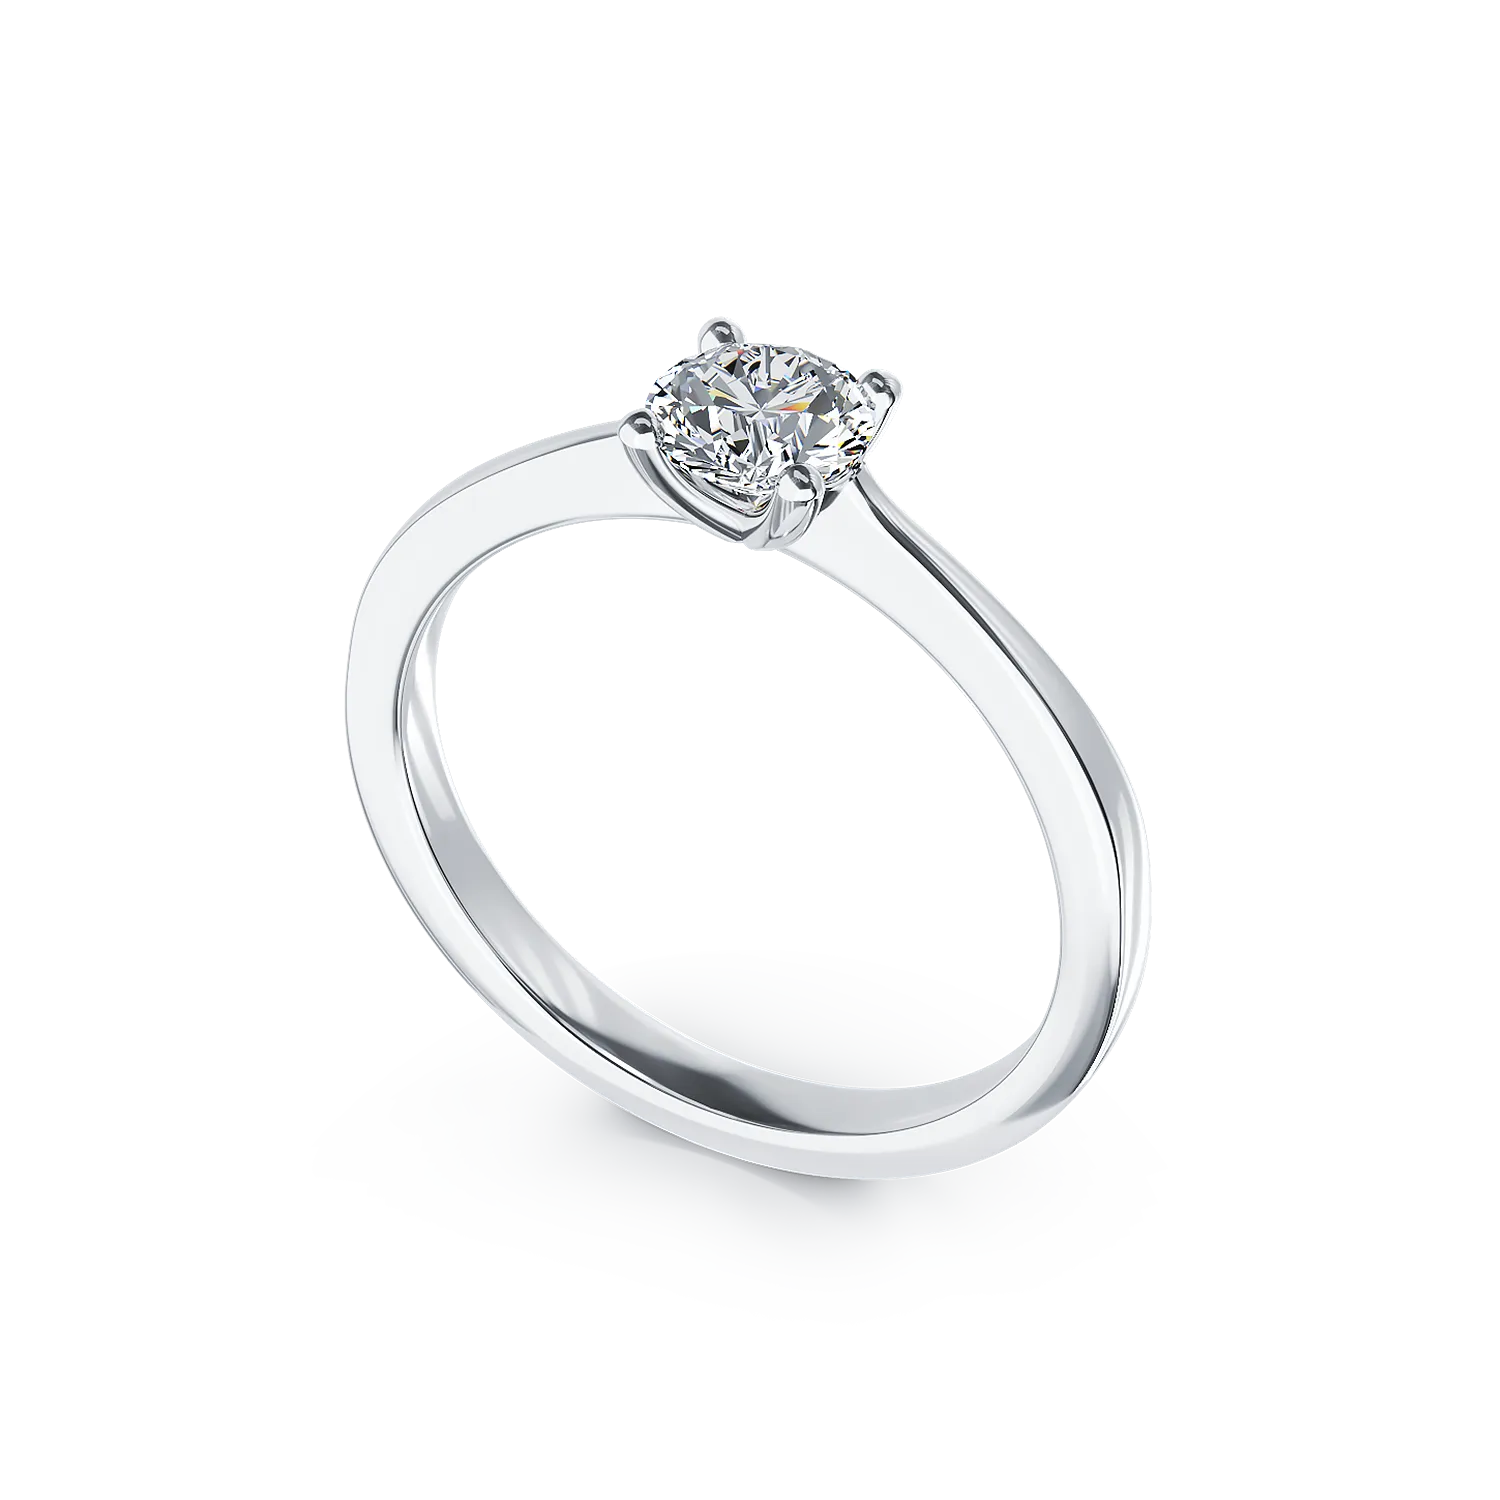 18K white gold engagement ring with 0.39ct diamond